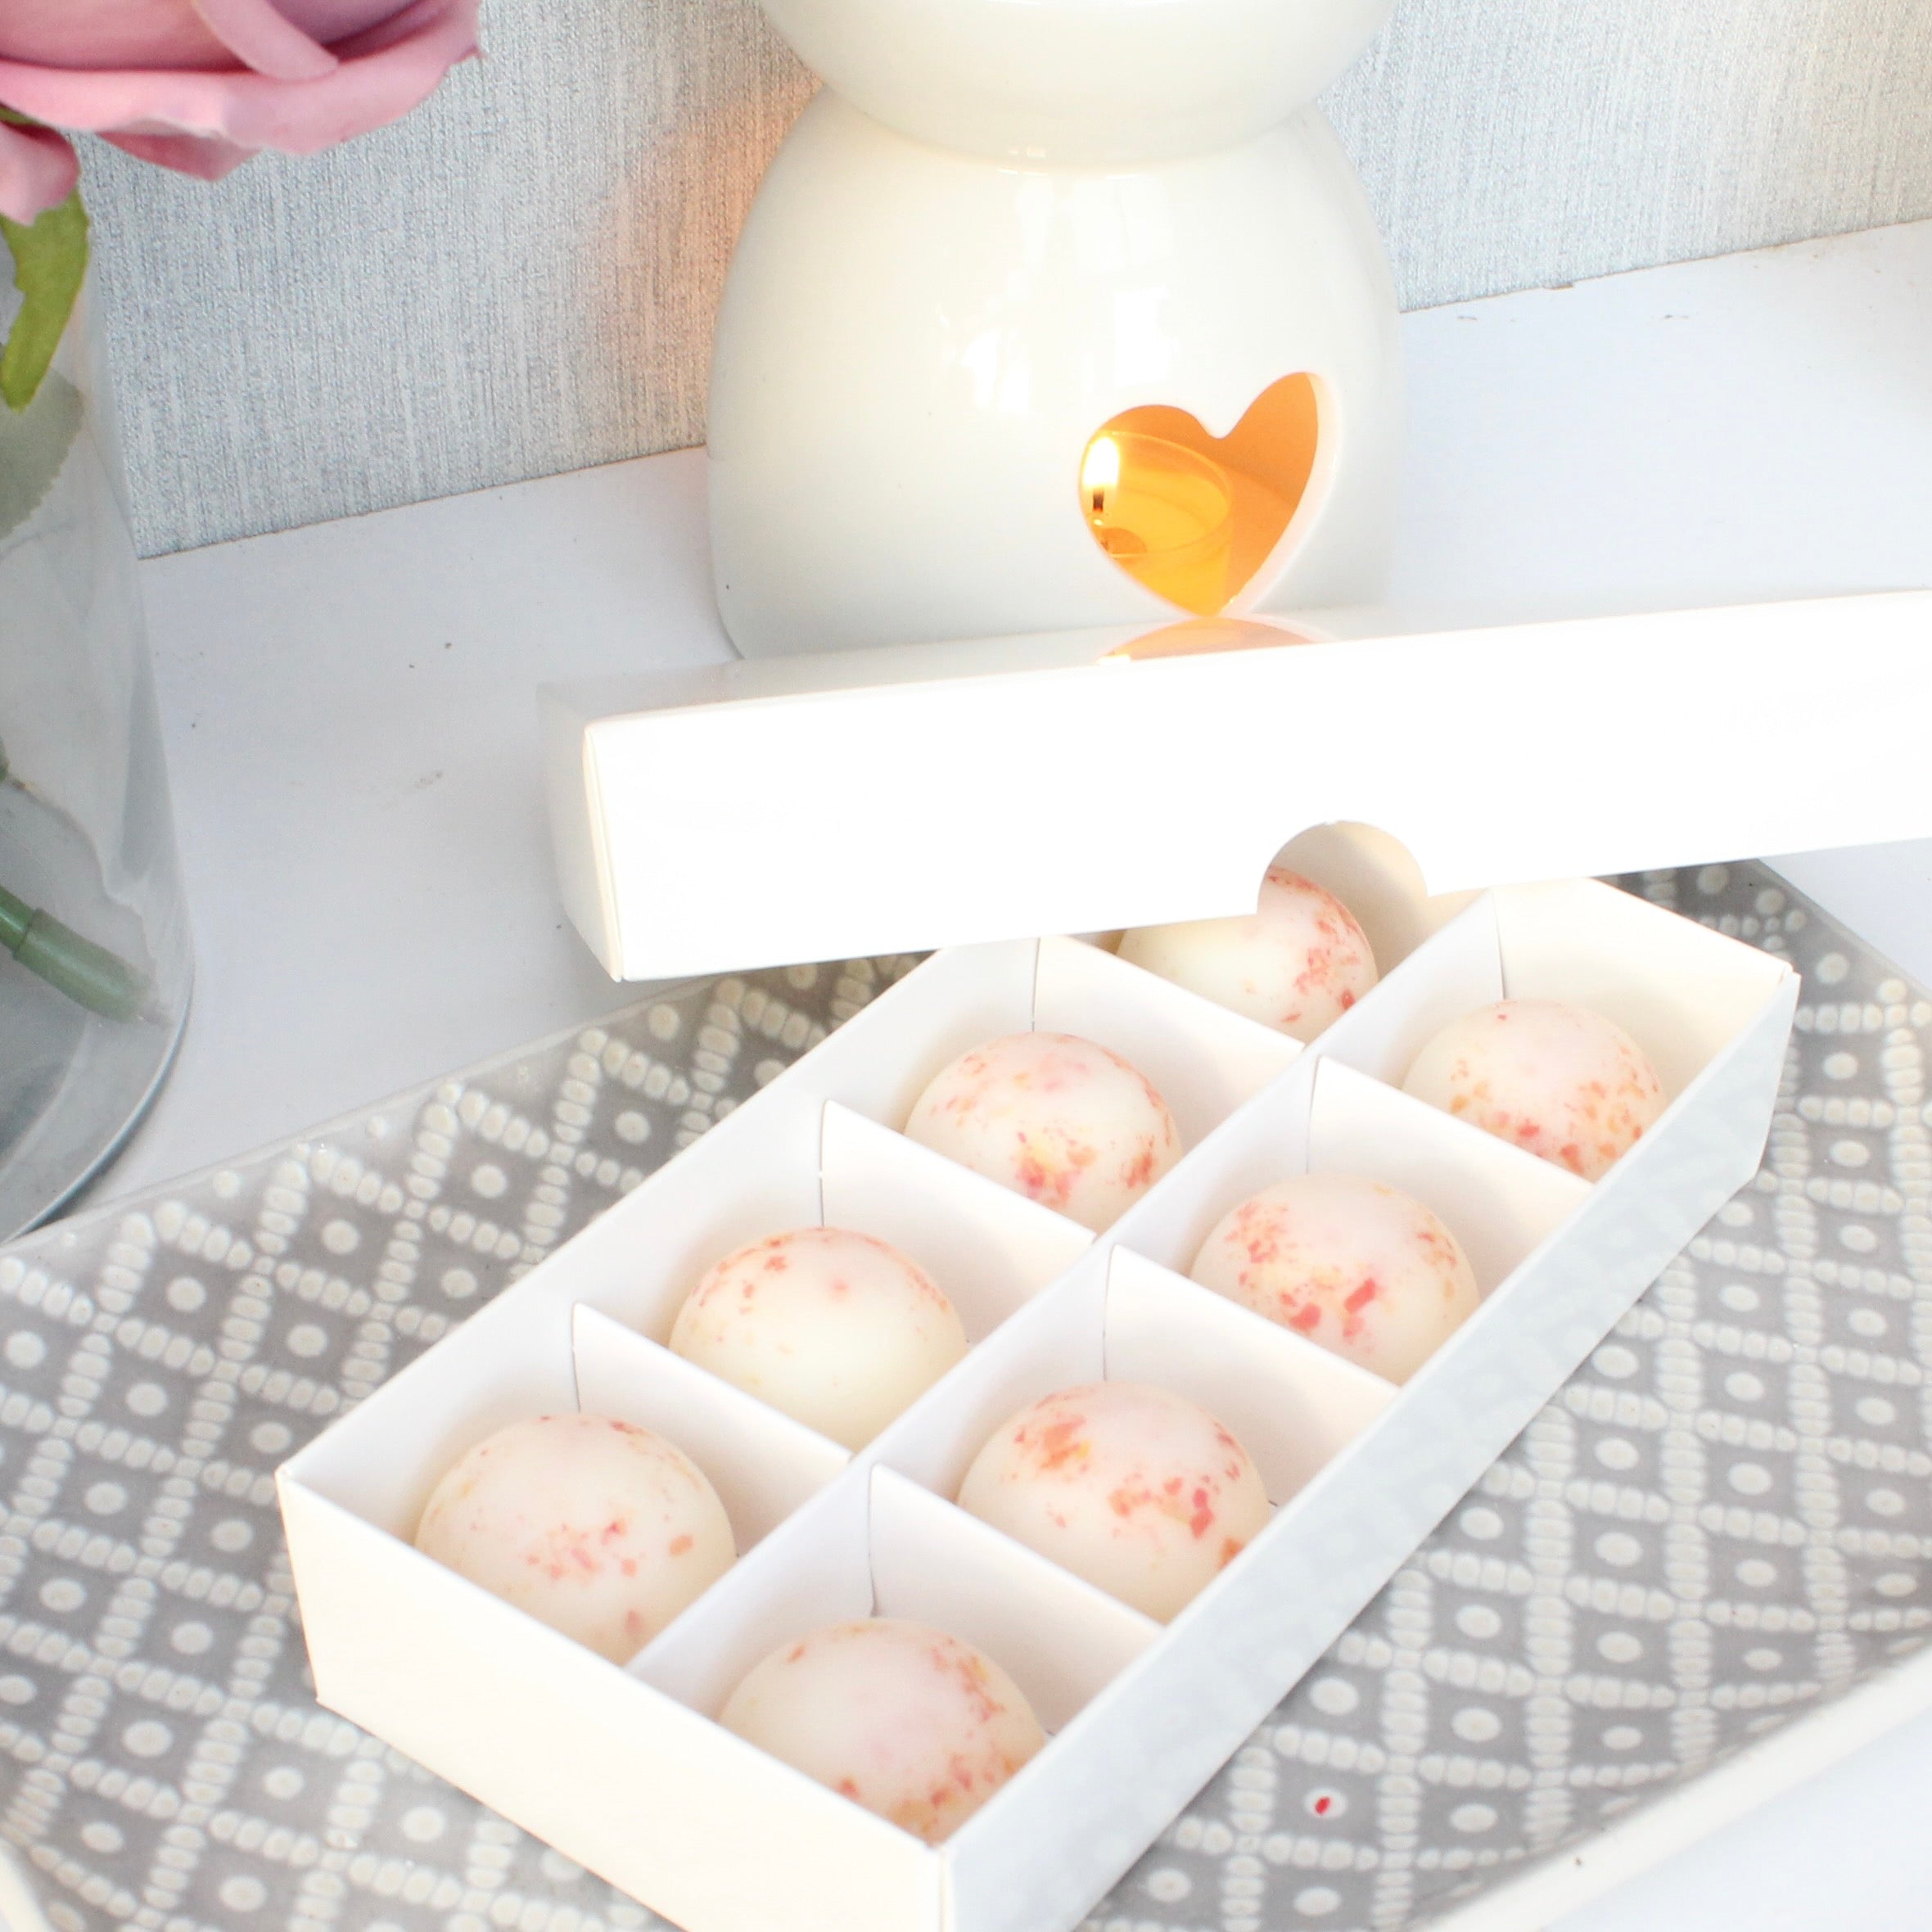 Relax & Unwind Scented Wax Melts